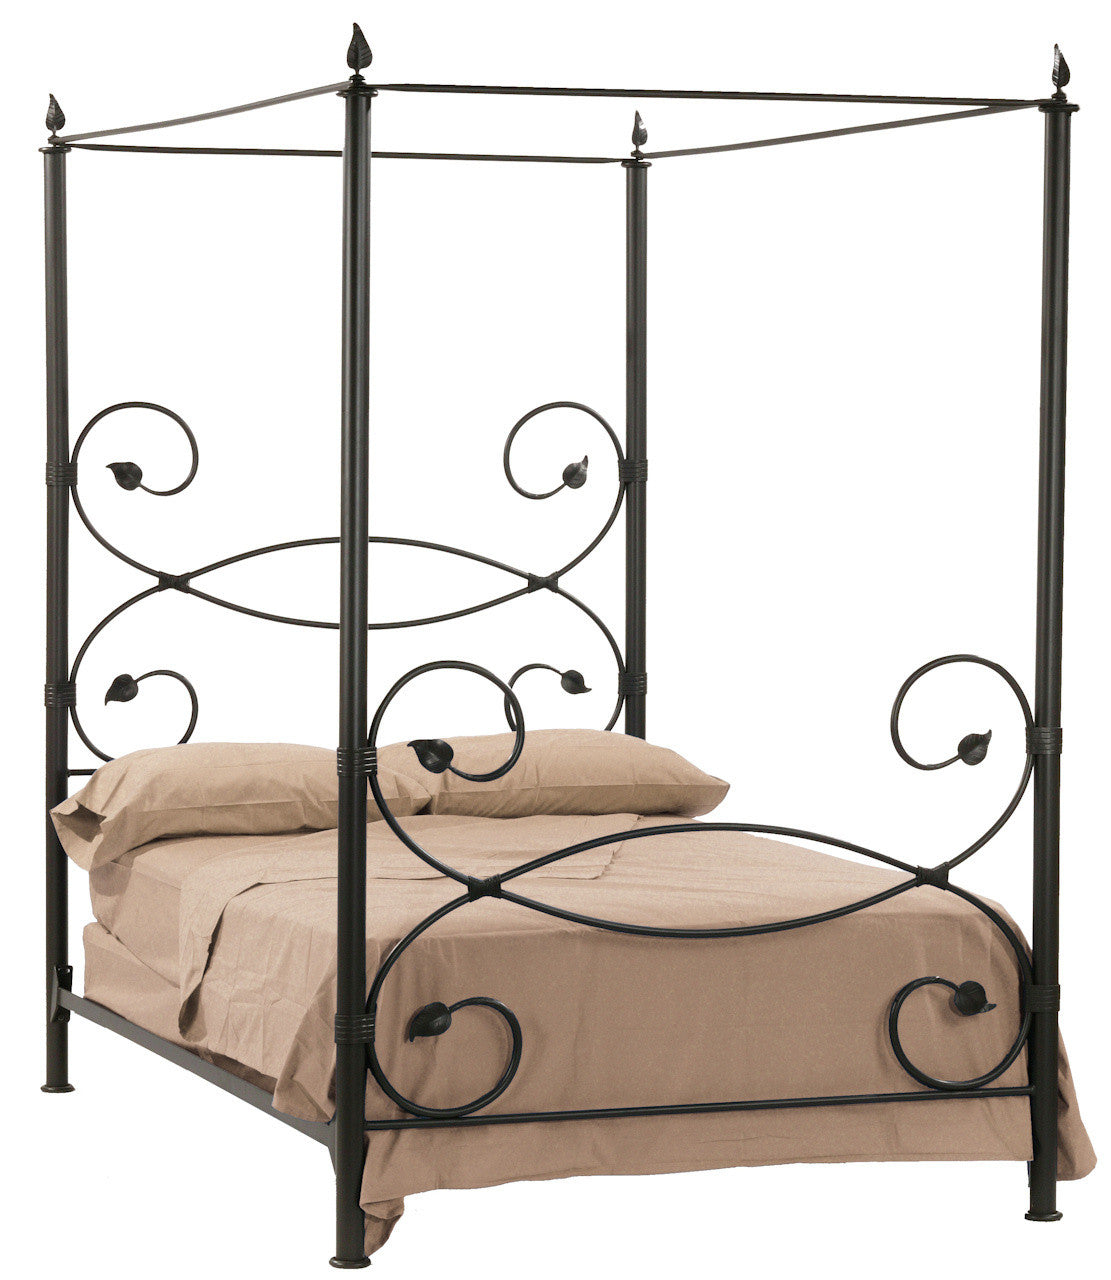 Stone County Ironworks 900-739 Leaf Canopy King Bed